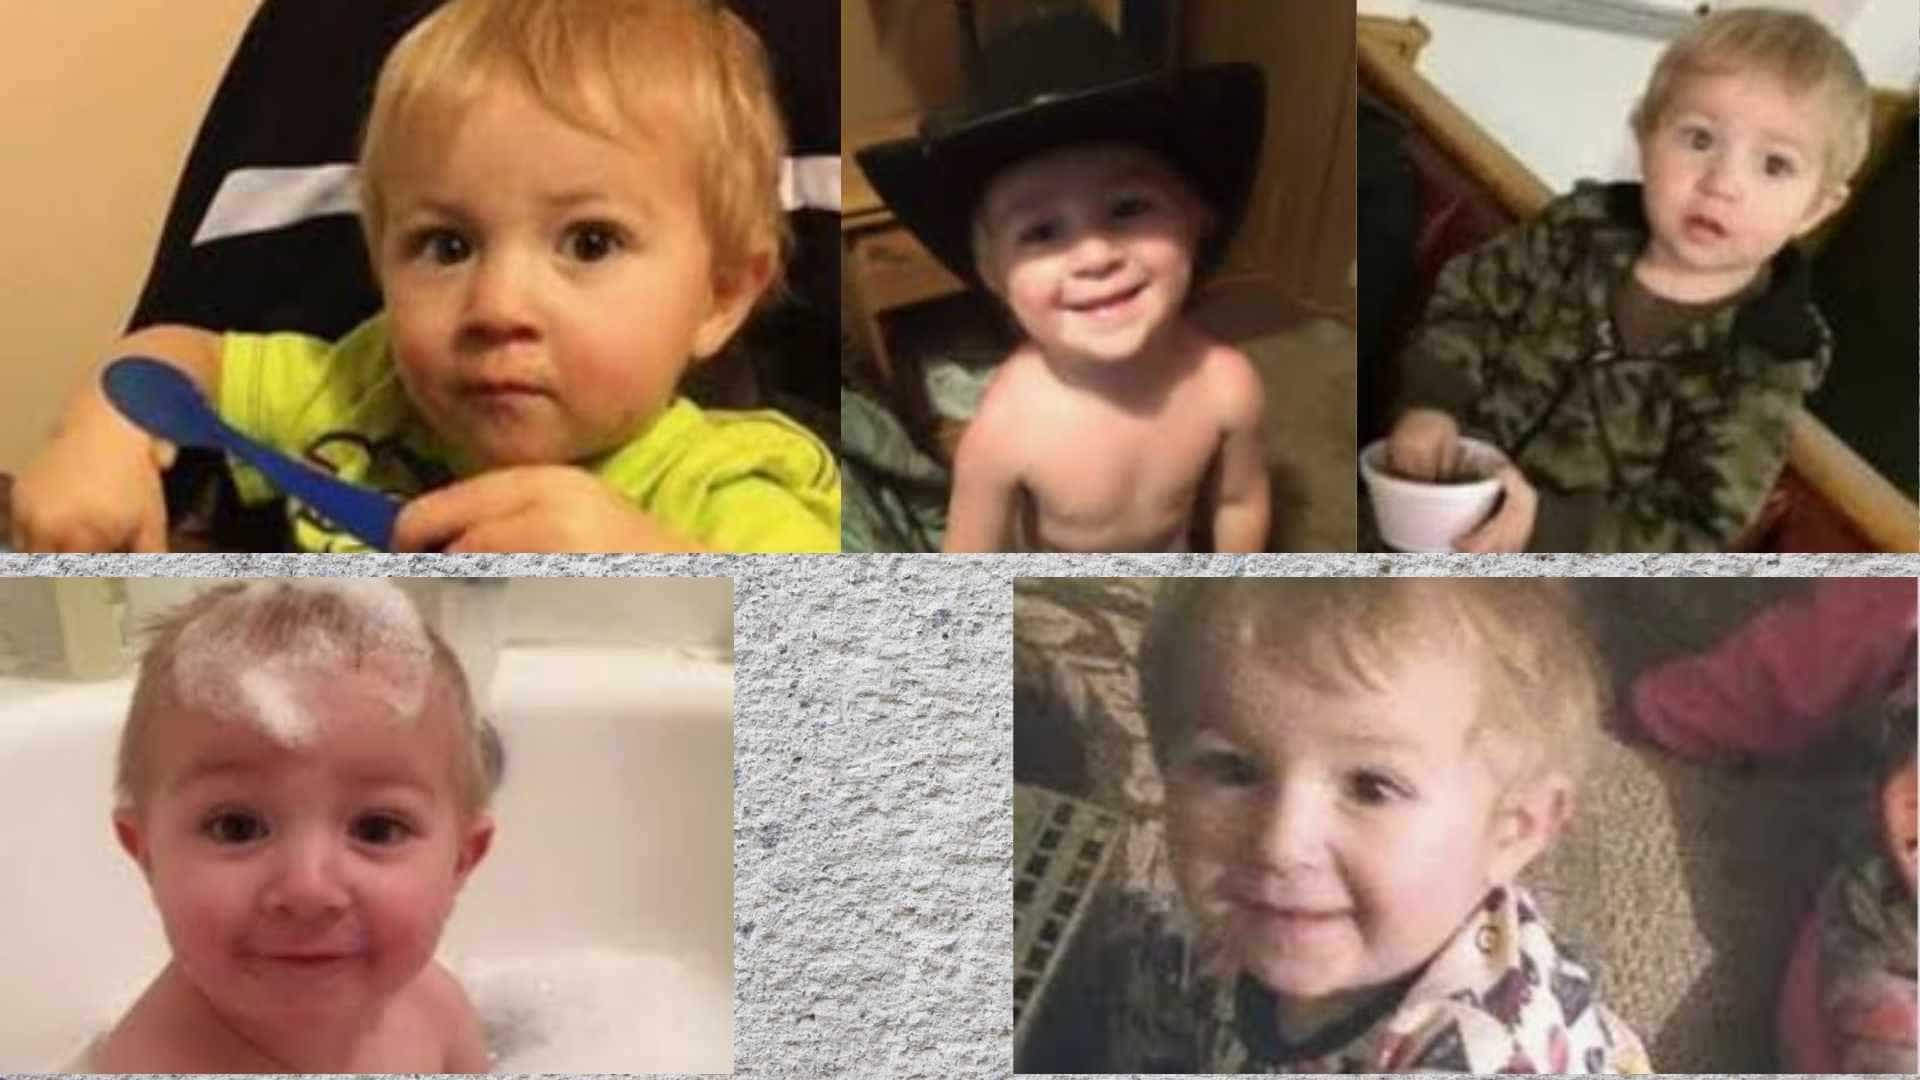 5 Things You Need to Know About DeOrr Kunz Disappearance